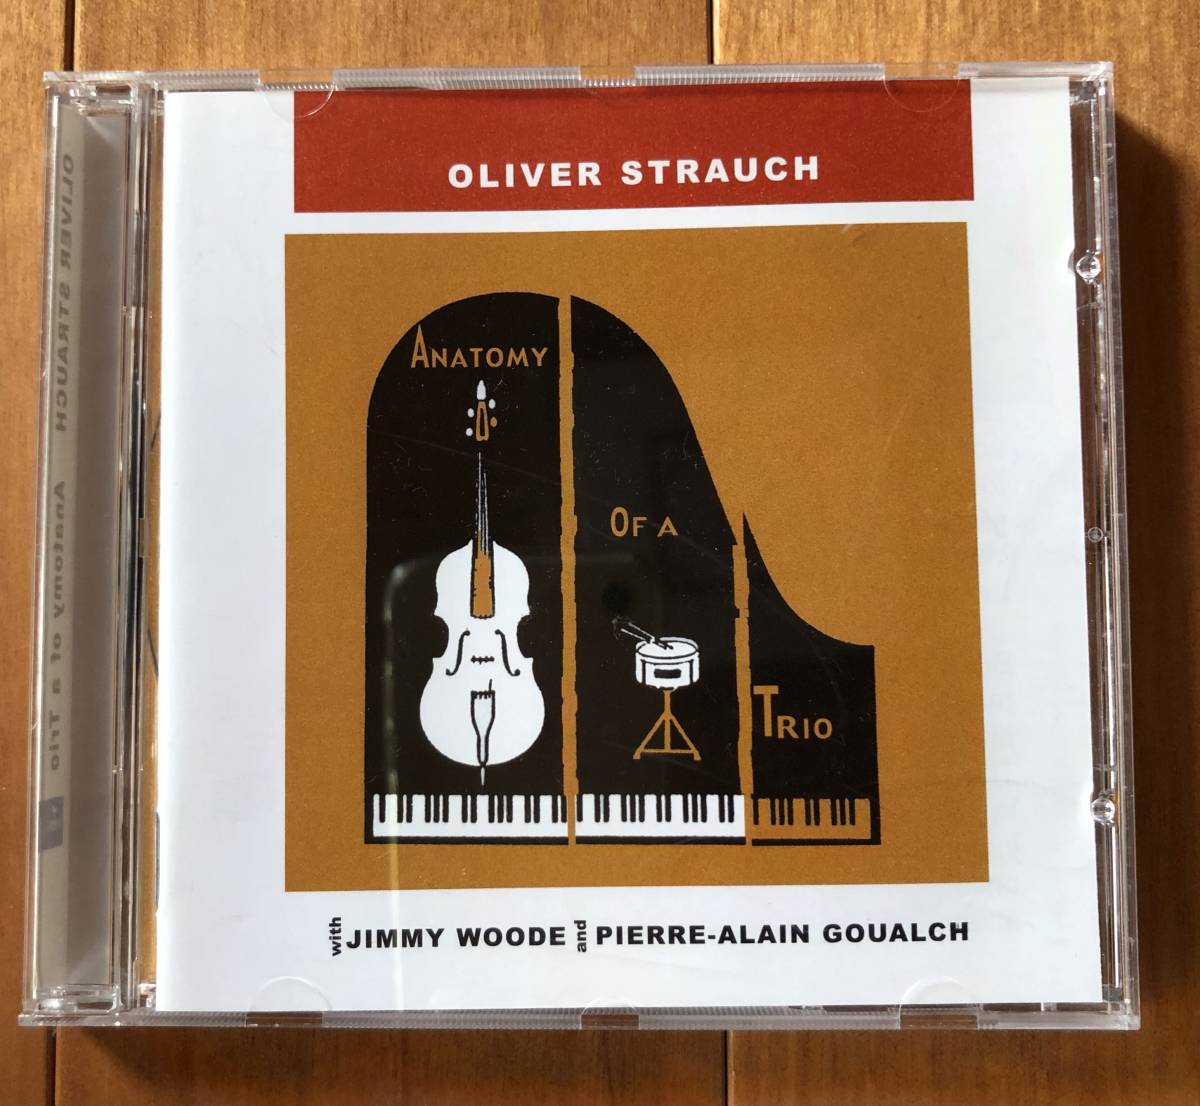 CD-Aug / 独 Laika-Records / Oliver Strauch(drums) Jimmy Woode(bass) Pierre-Alain Goualch(piano) / OLIVER STRAUCH Anatomy of a Trio